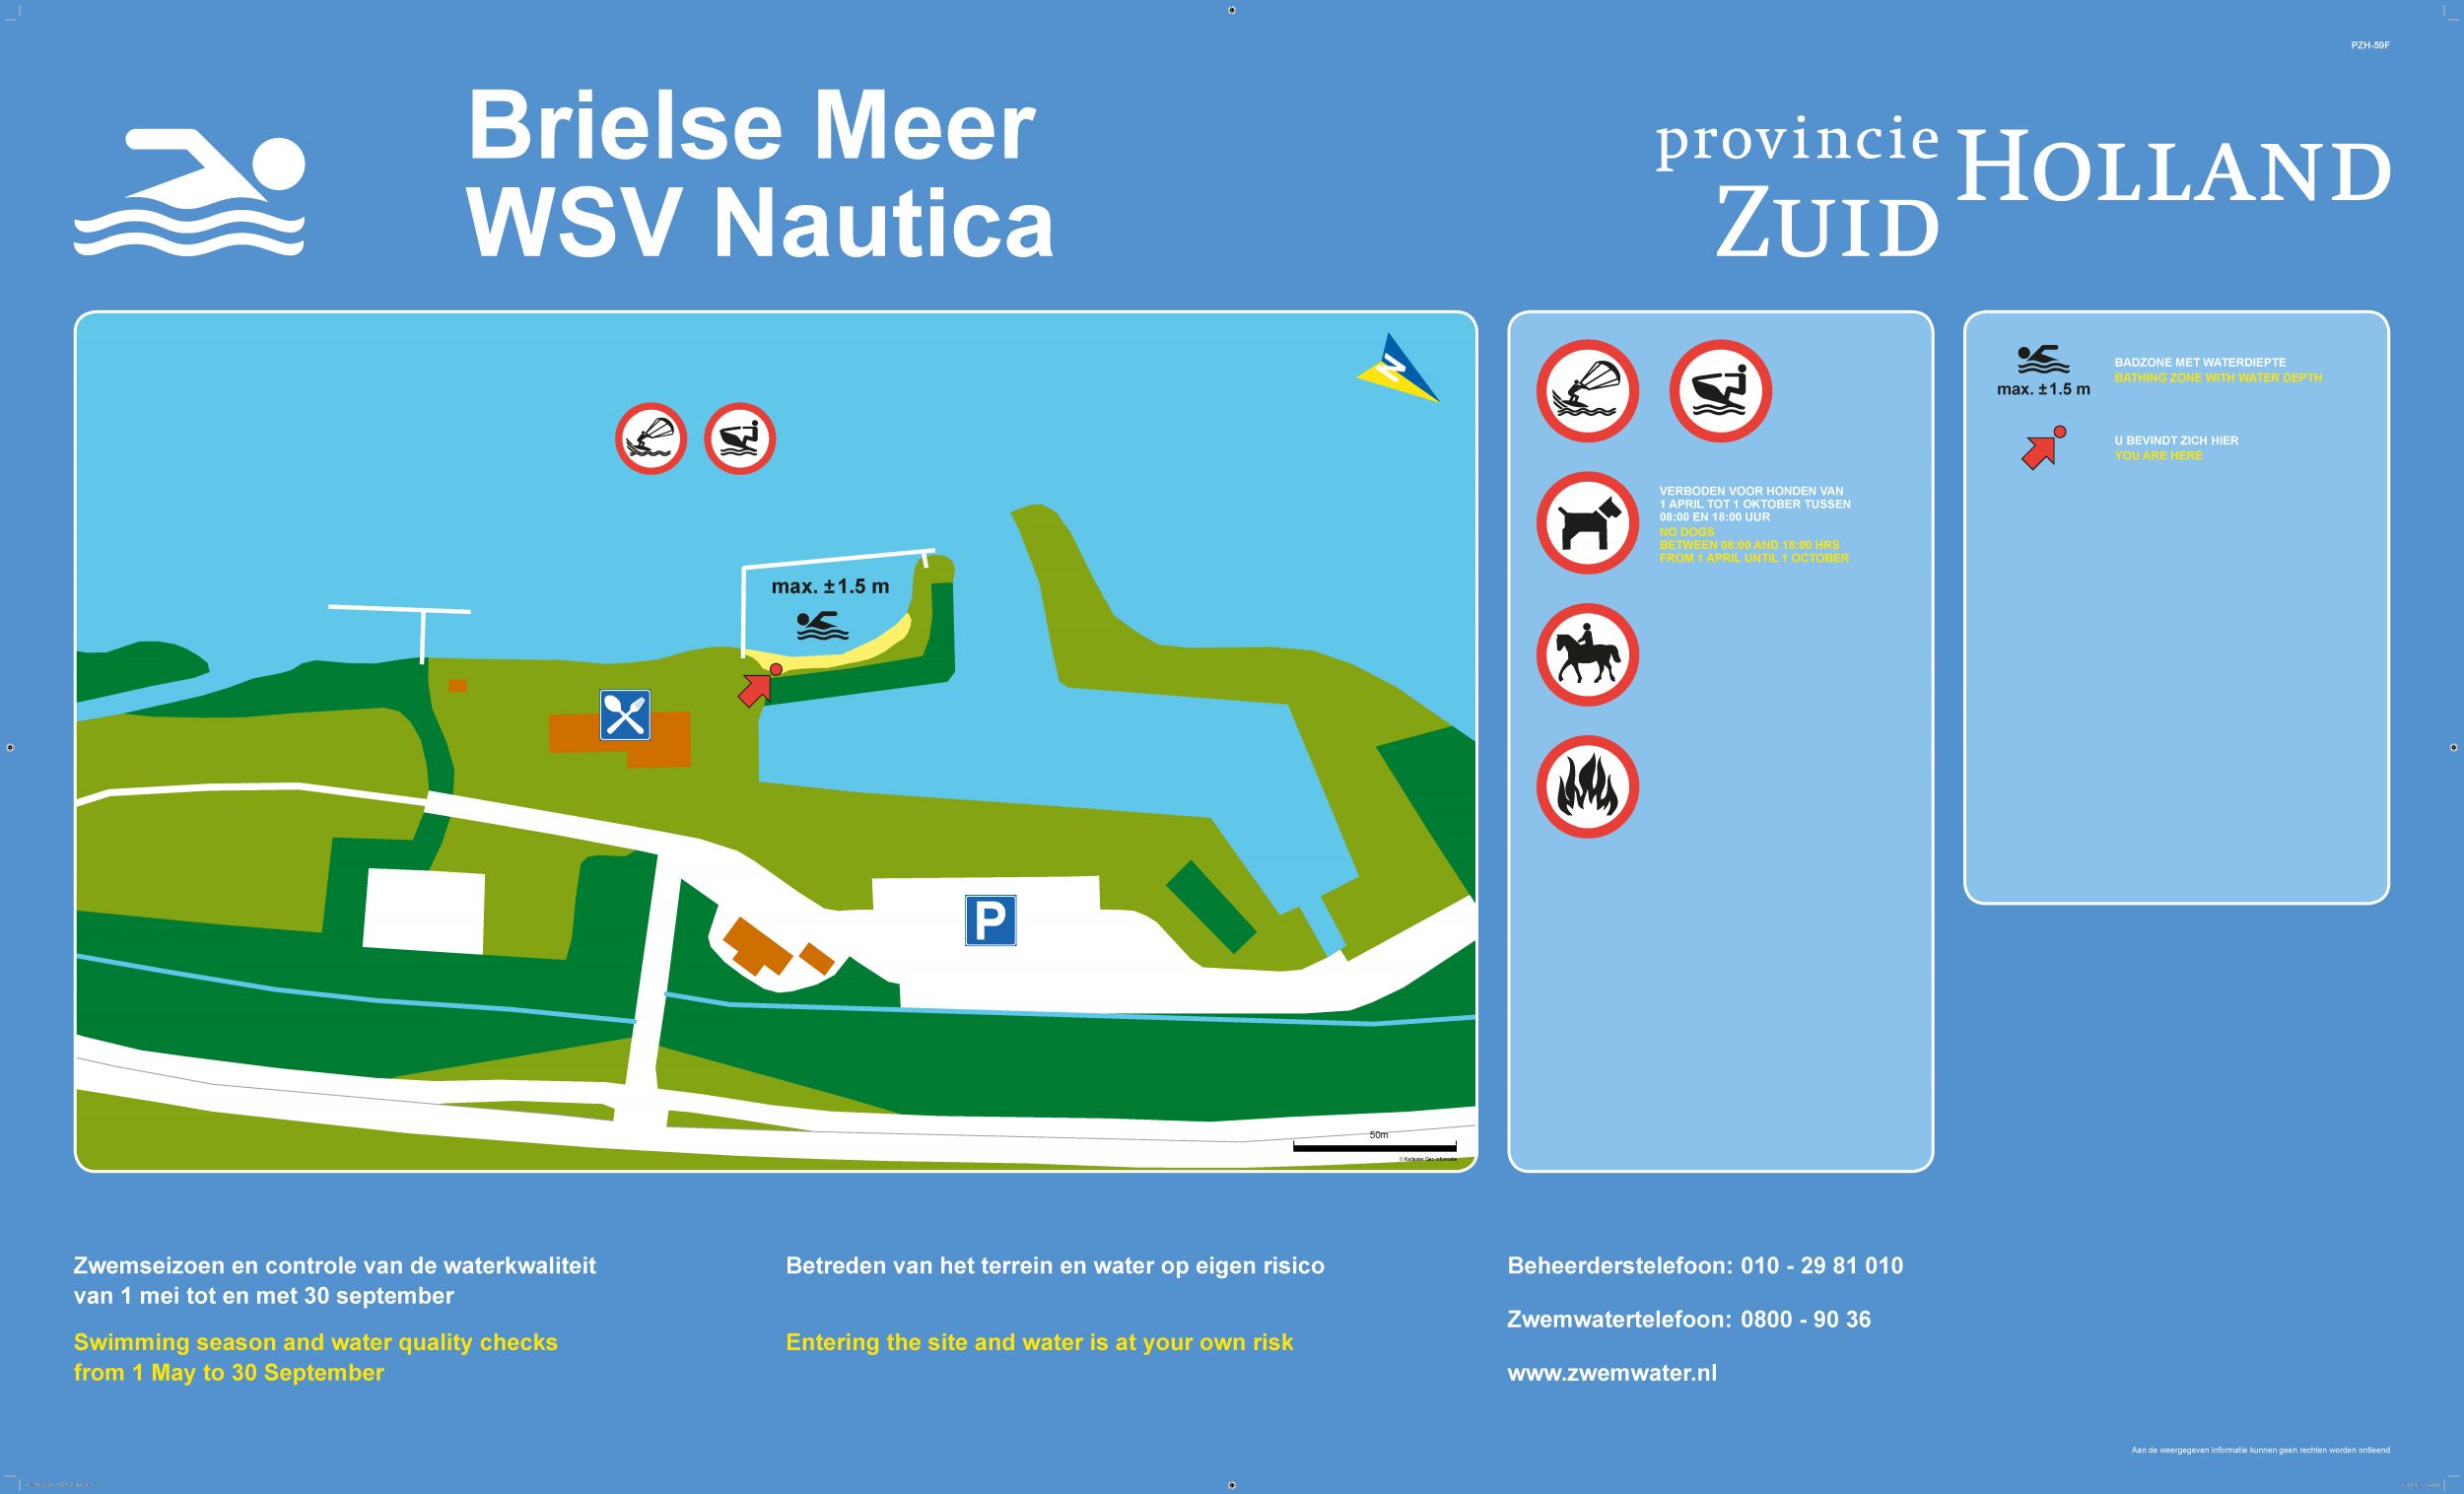 The information board at the swimming location Brielse Meer WSV Nautica